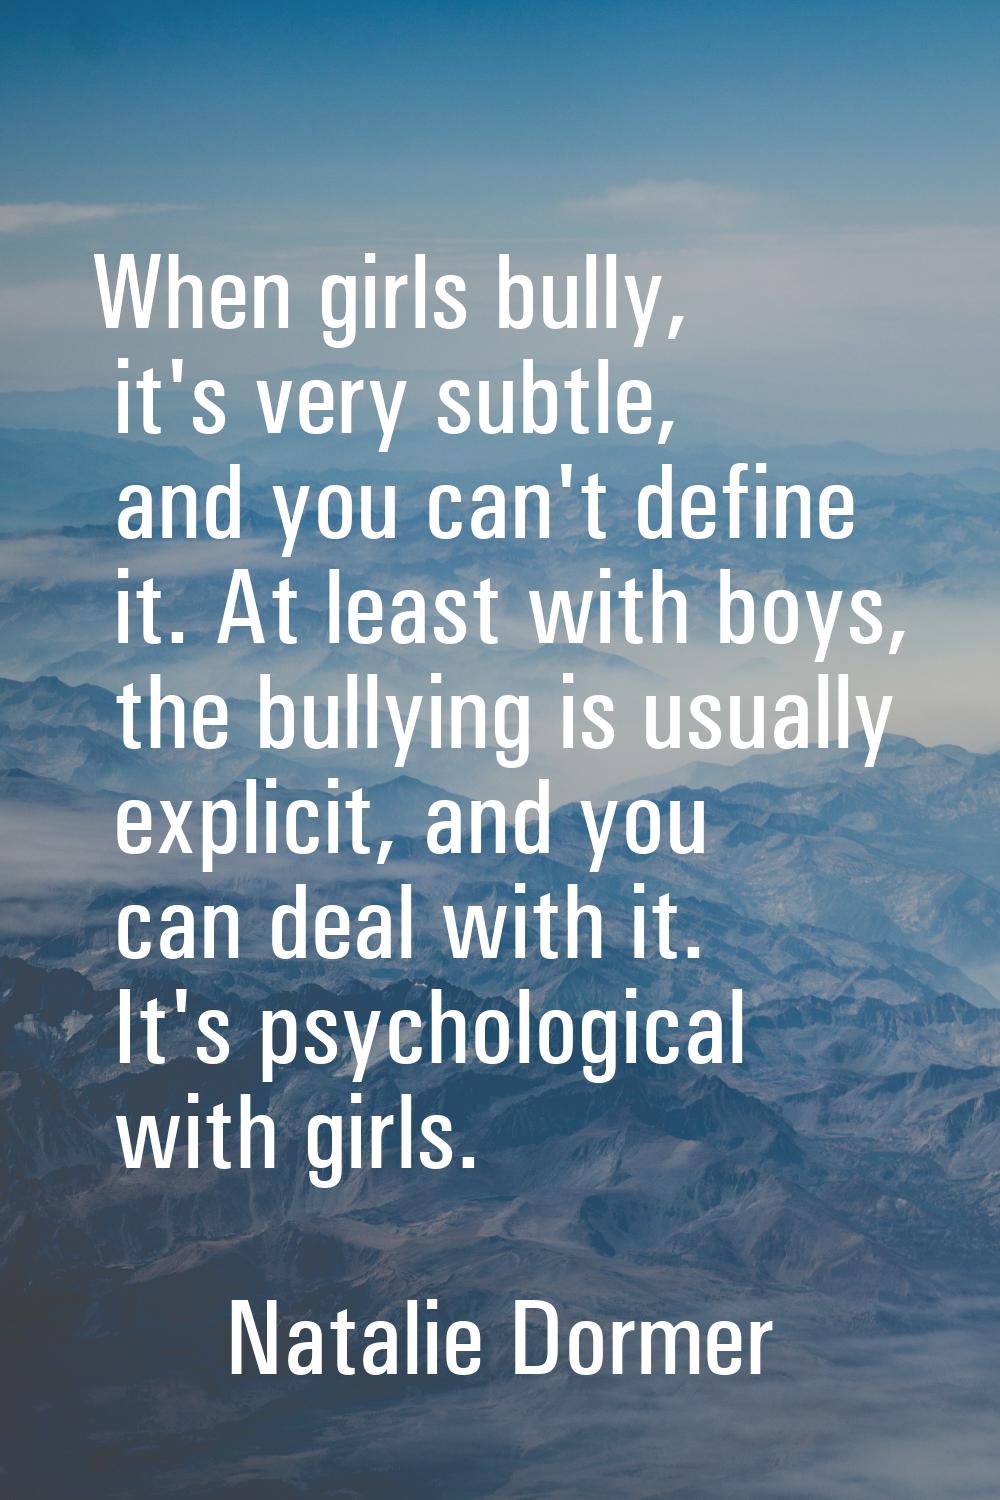 When girls bully, it's very subtle, and you can't define it. At least with boys, the bullying is us